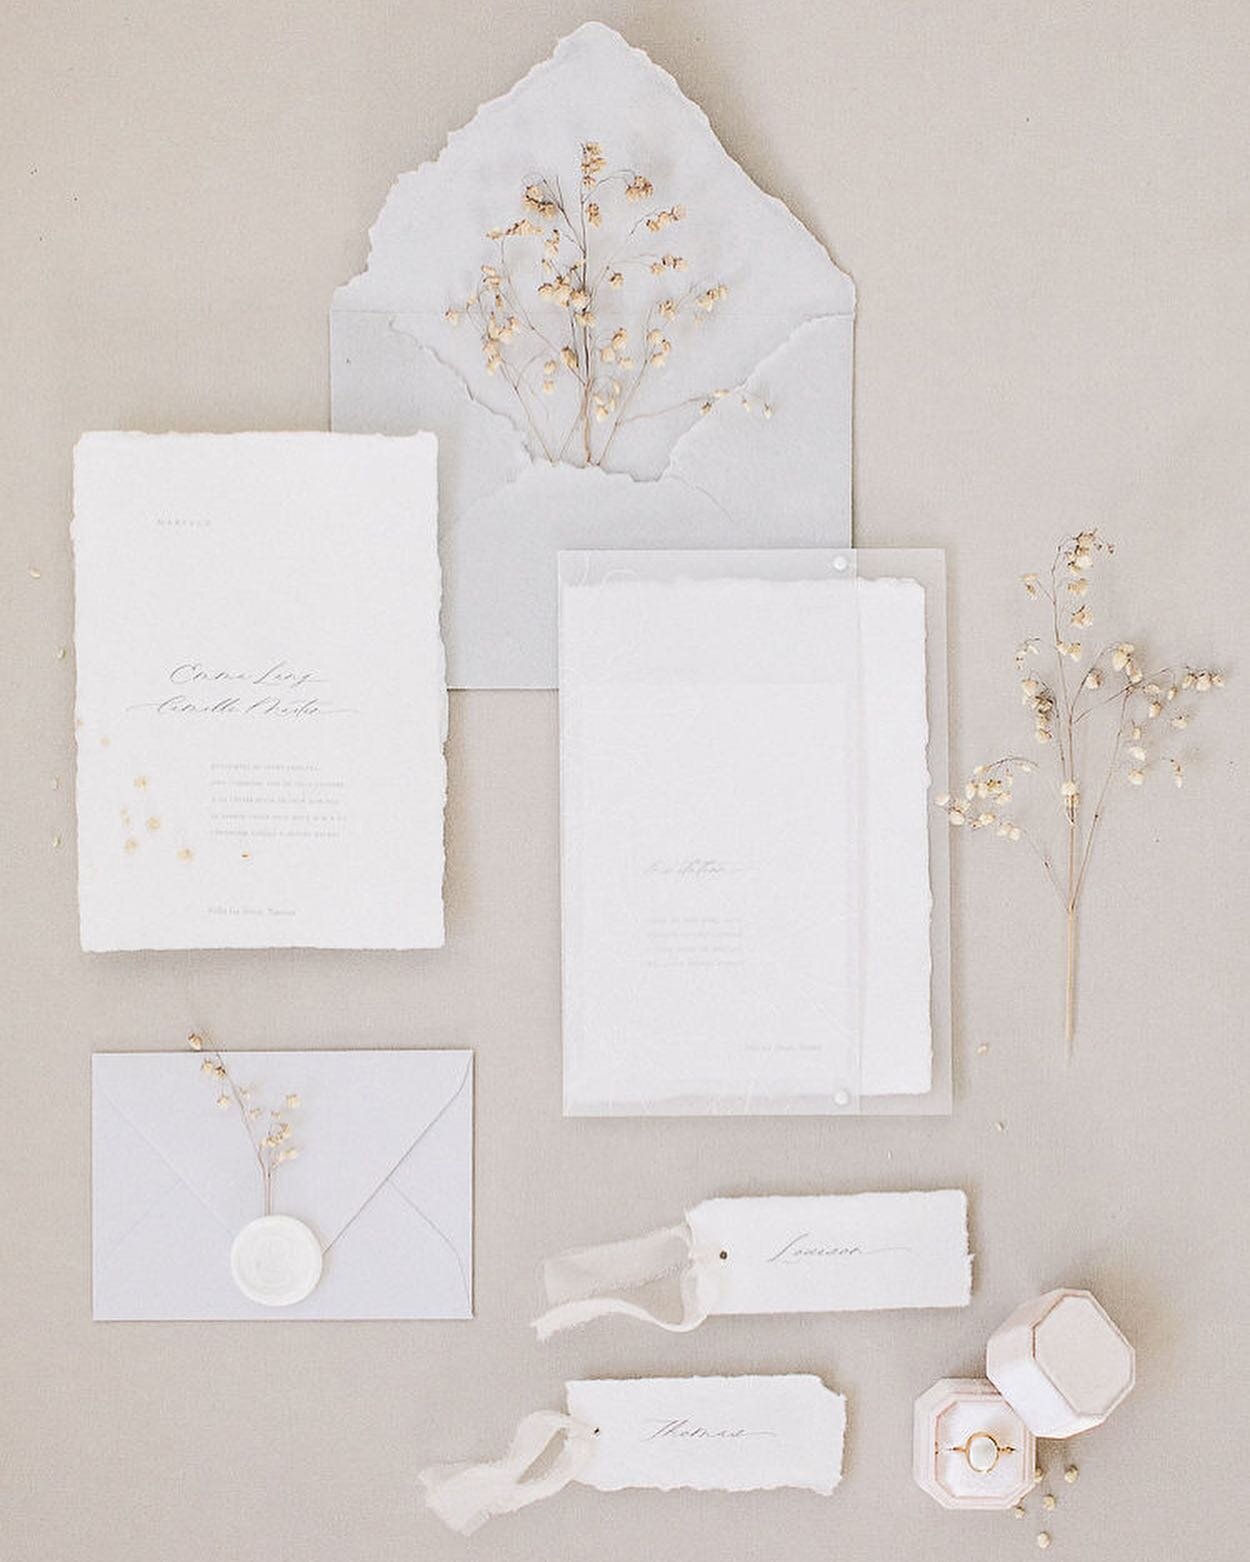 Flatlays of the beautiful invitation suite from @myne_creation and others details from our white etheral editorial featured in @weddingsparrow
.
Wedding accessories from @gibsonbespoke 
Antique Pearl ring from @hemingwayfineartstudio 
.

Photographer